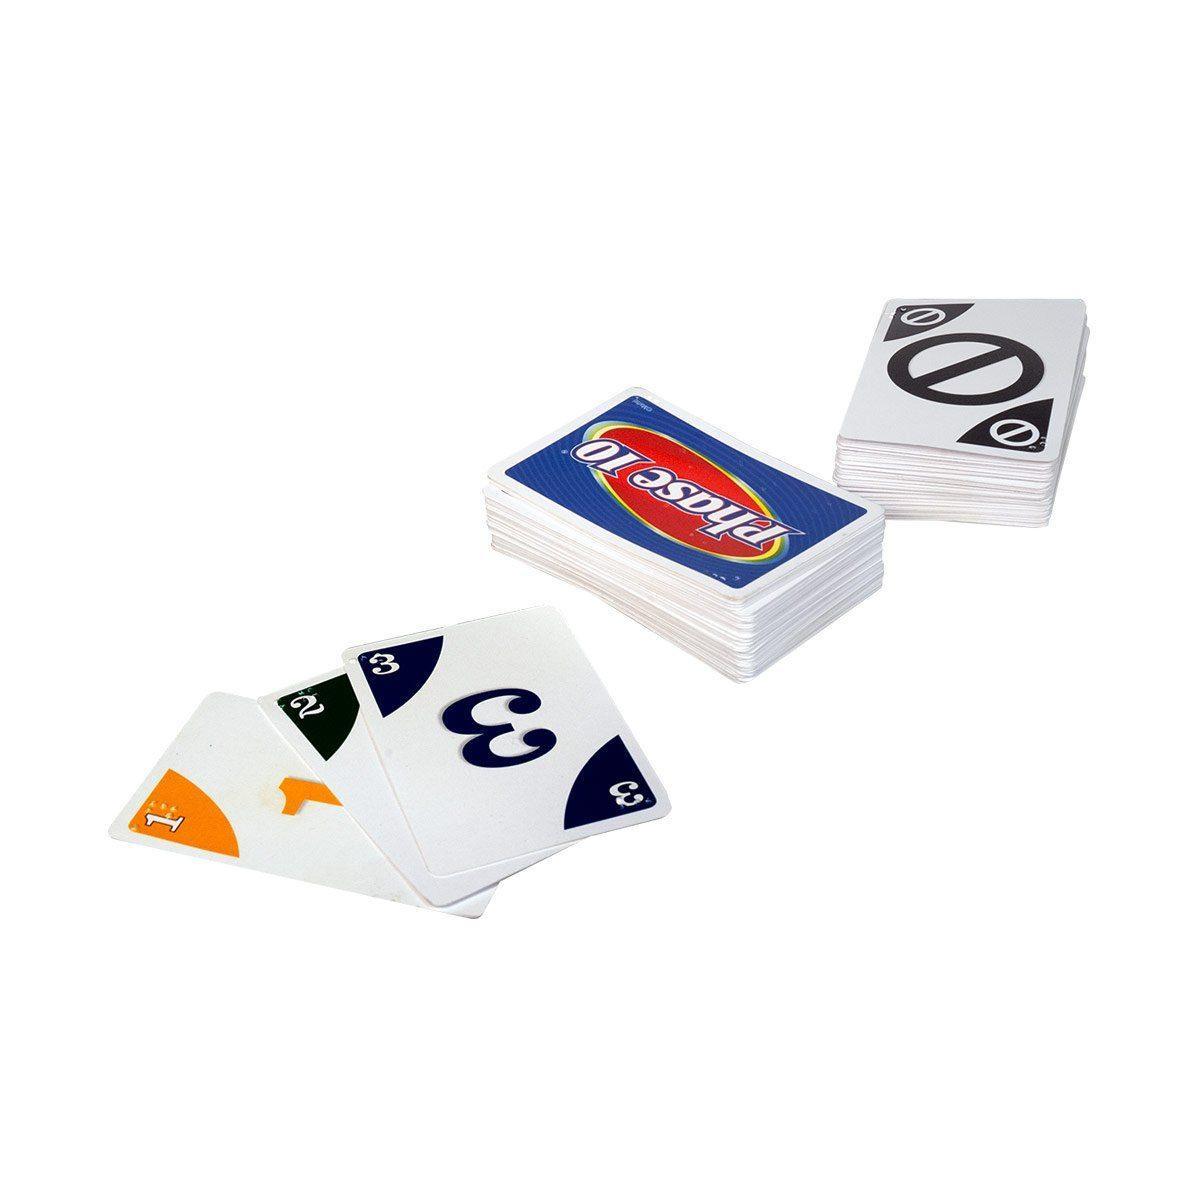 Braille Phase 10 Card Game - The Low Vision Store